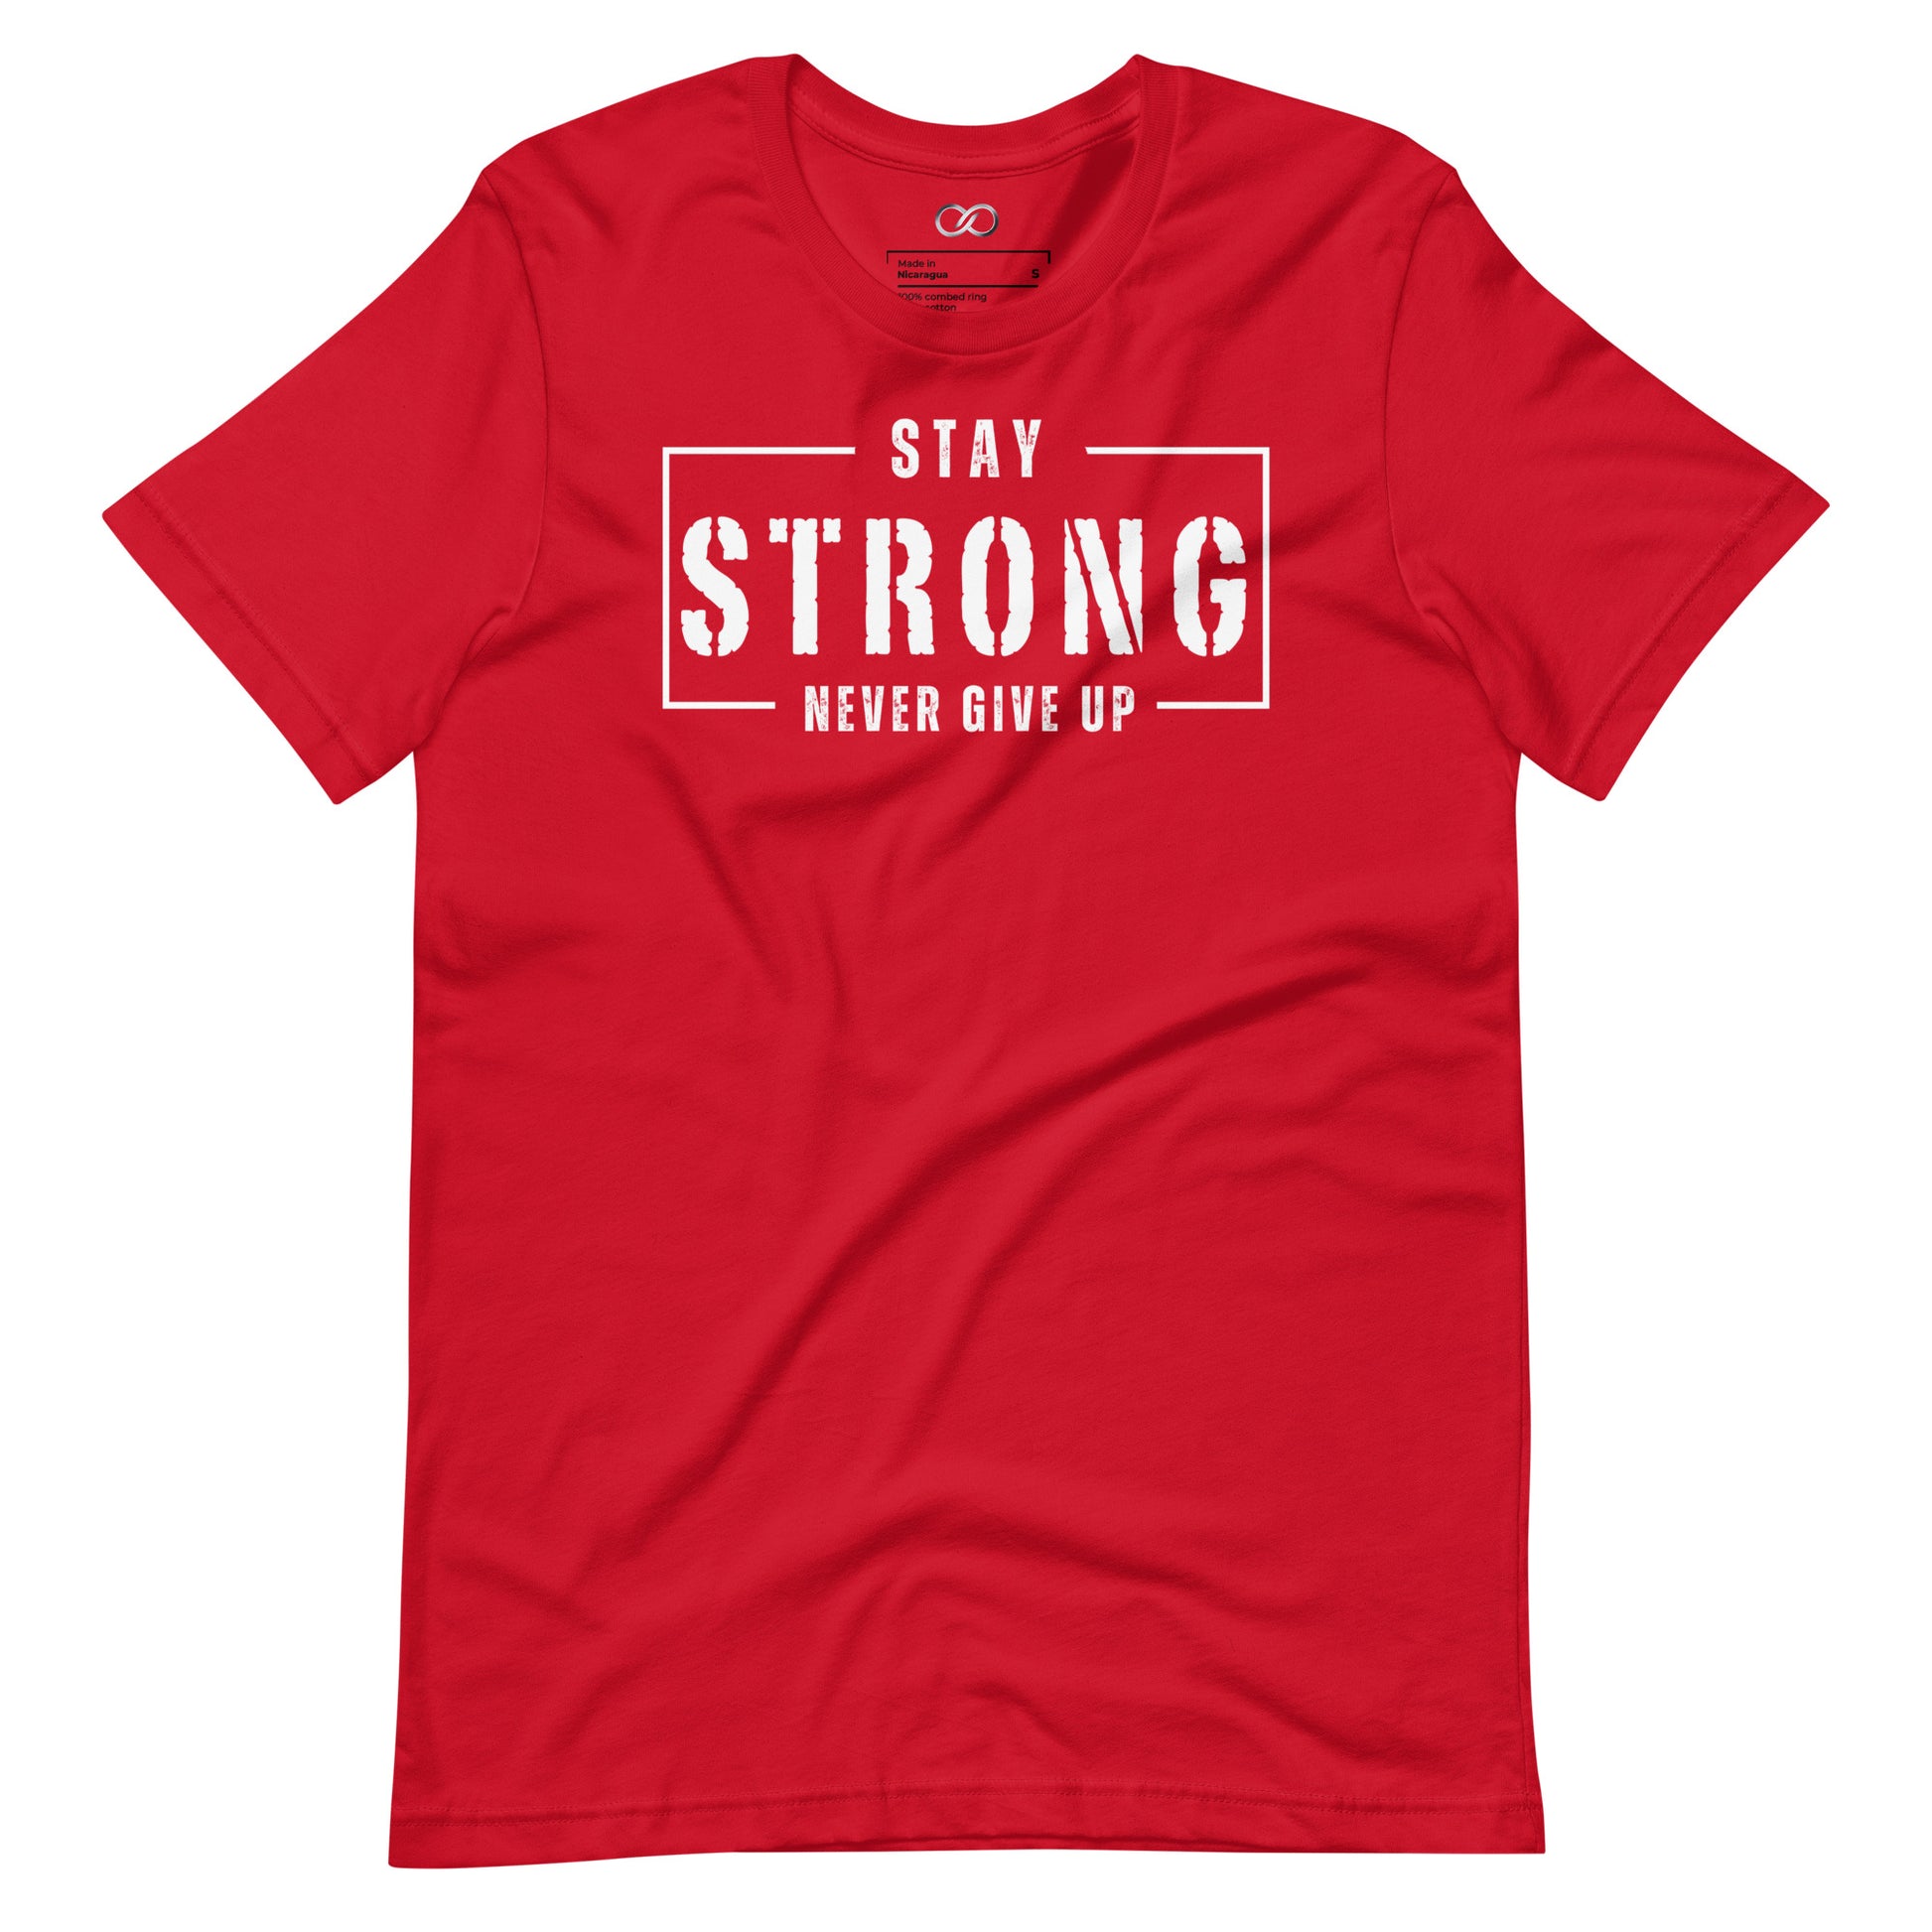 Red crew neck t-shirt featuring the motivational phrase 'Stay Strong Never Give Up' in bold white lettering, symbolizing determination and courage.